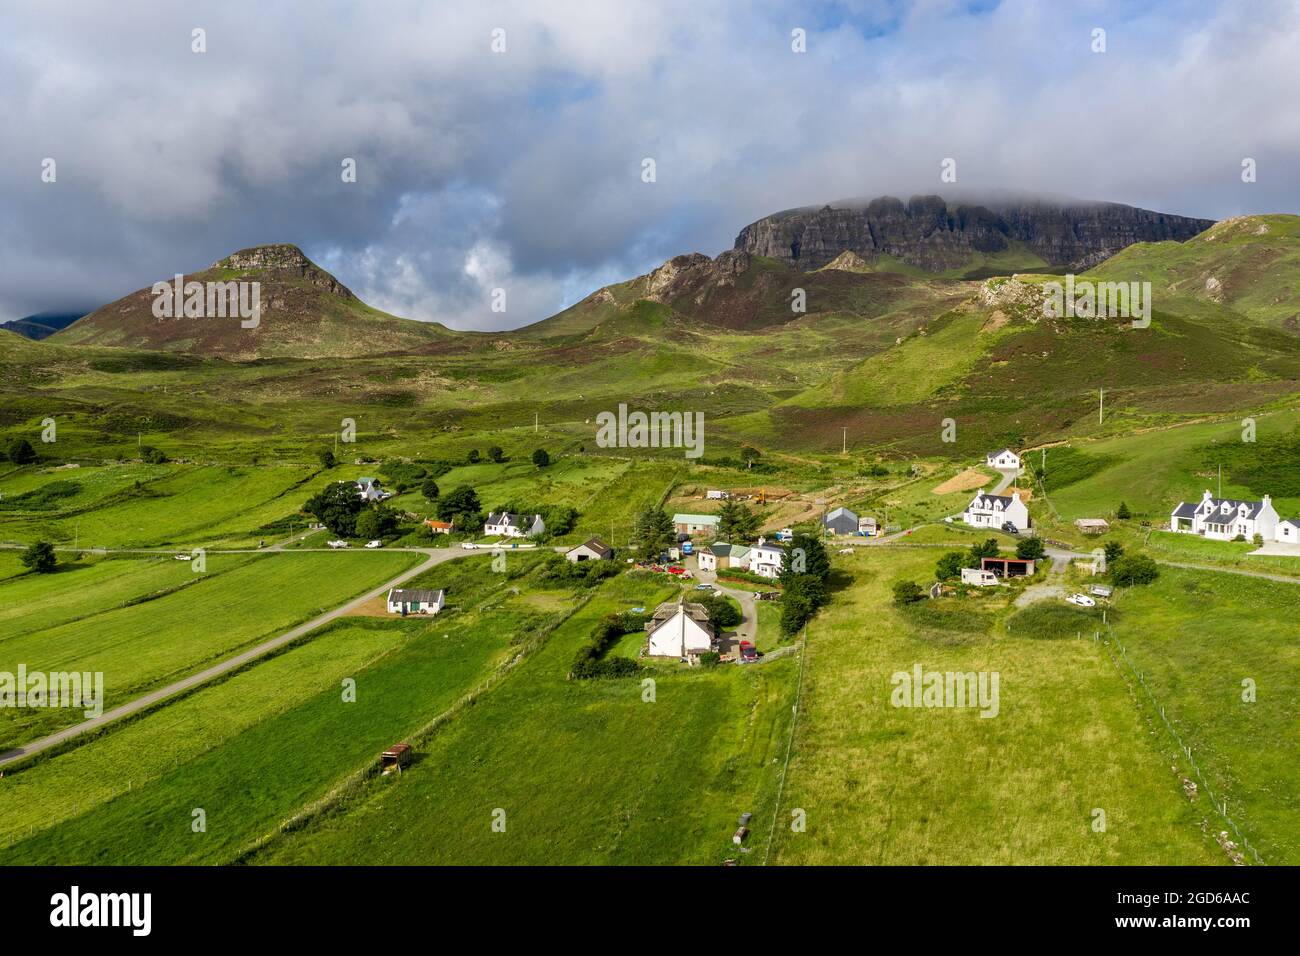 Quiraing, a scenic place along the Quiraing in the isle of Skye in Scotland. A lot of tourist can be found hiking in this area in summertime. Stock Photo